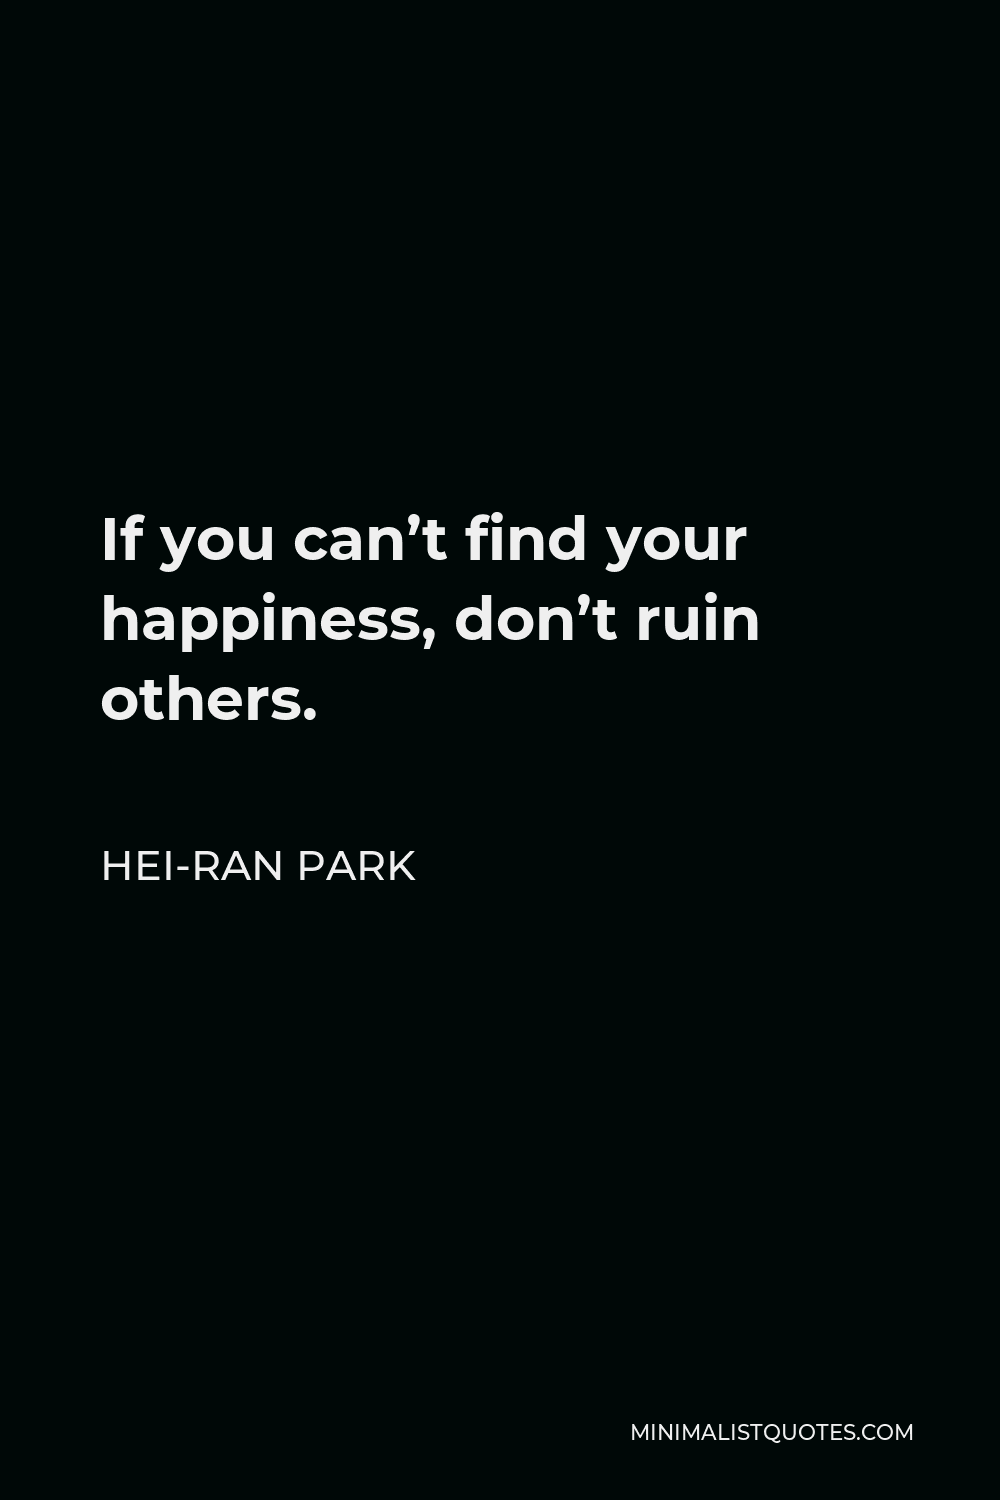 Hei-Ran Park Quote - If you can’t find your happiness, don’t ruin others.